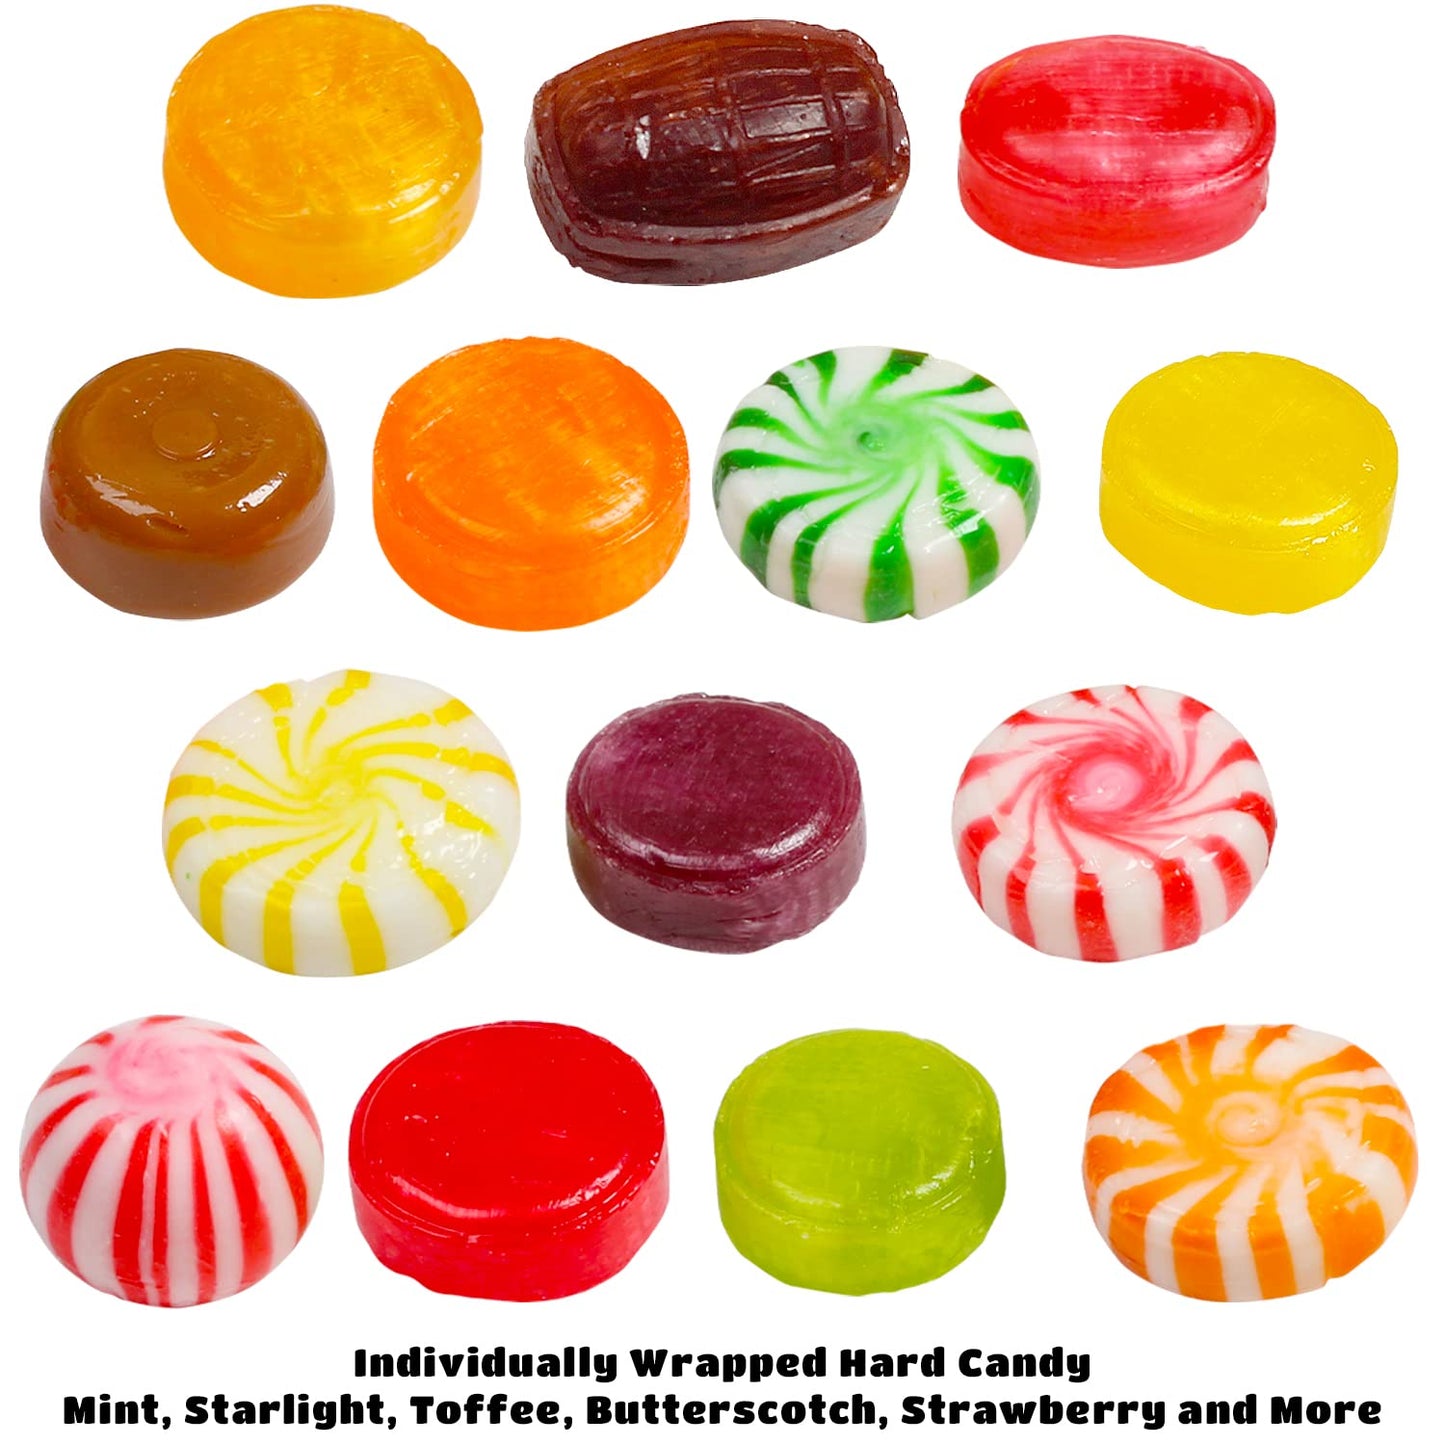 Hard Candy Mix - 3 LB Bulk Variety Candy Bag - Classic Hard Candy Assortment - Hard Candies Sampler - Individually Wrapped Hard Candy - Mint, Starlight, Toffee, Butterscotch, Strawberry and More